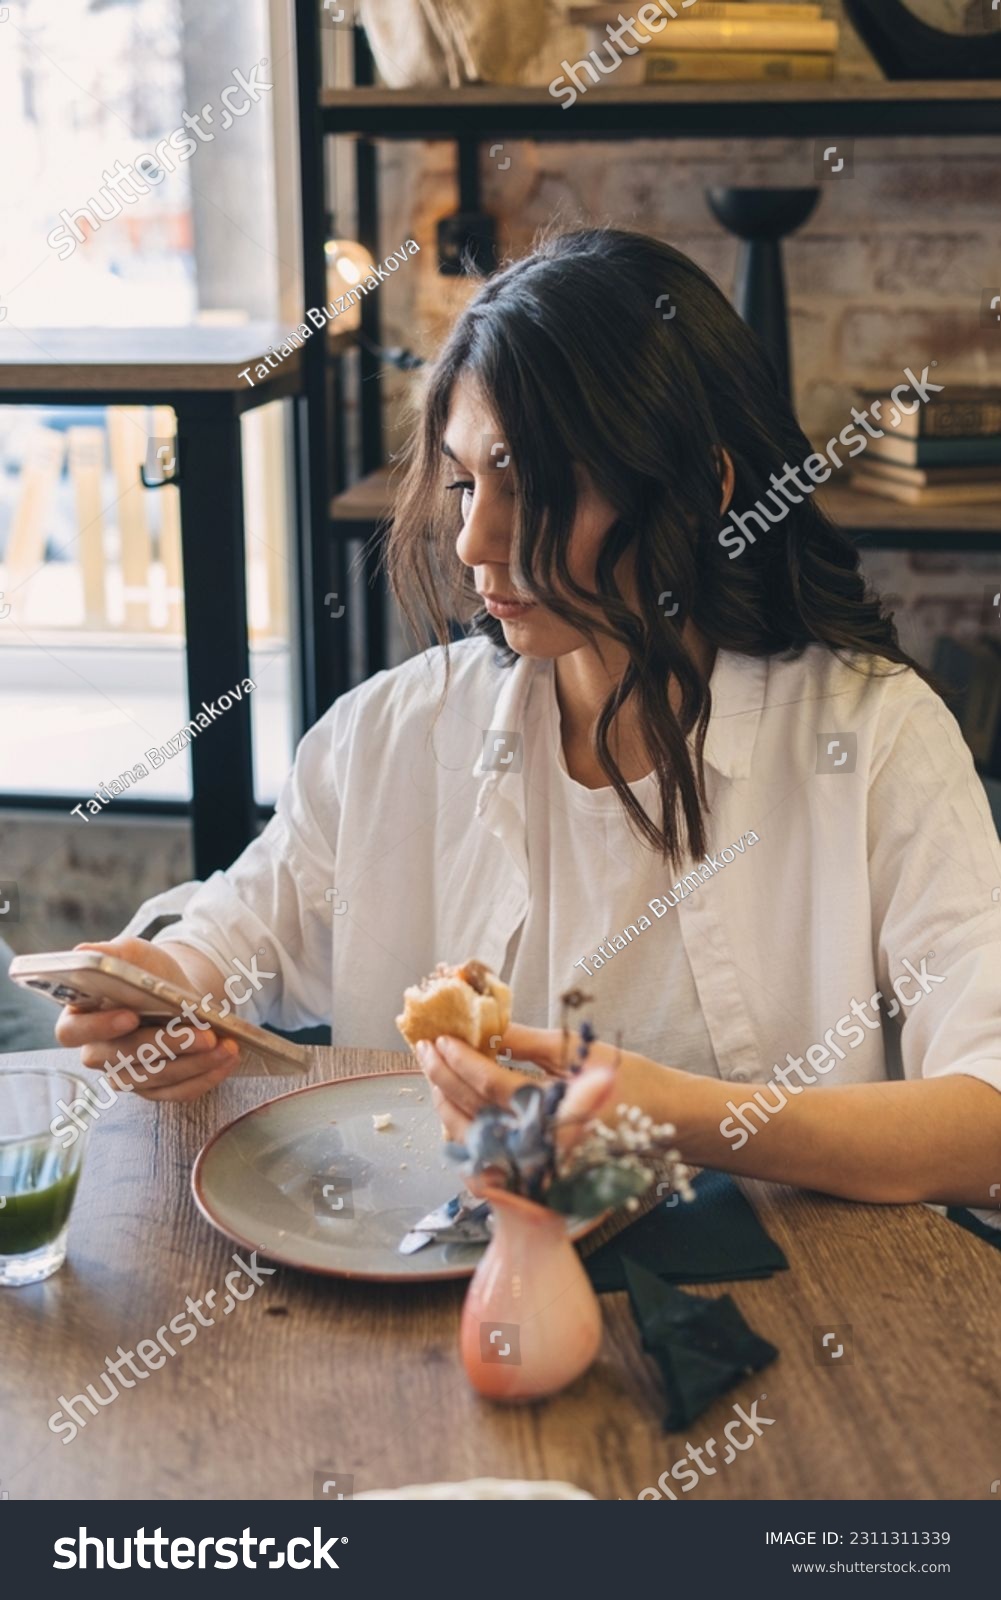 Portrait of a young attractive dark-haired woman eating a sandwich in a cafe and using a smartphone.Remote work,business, freelance,blogging,social media concept. #2311311339